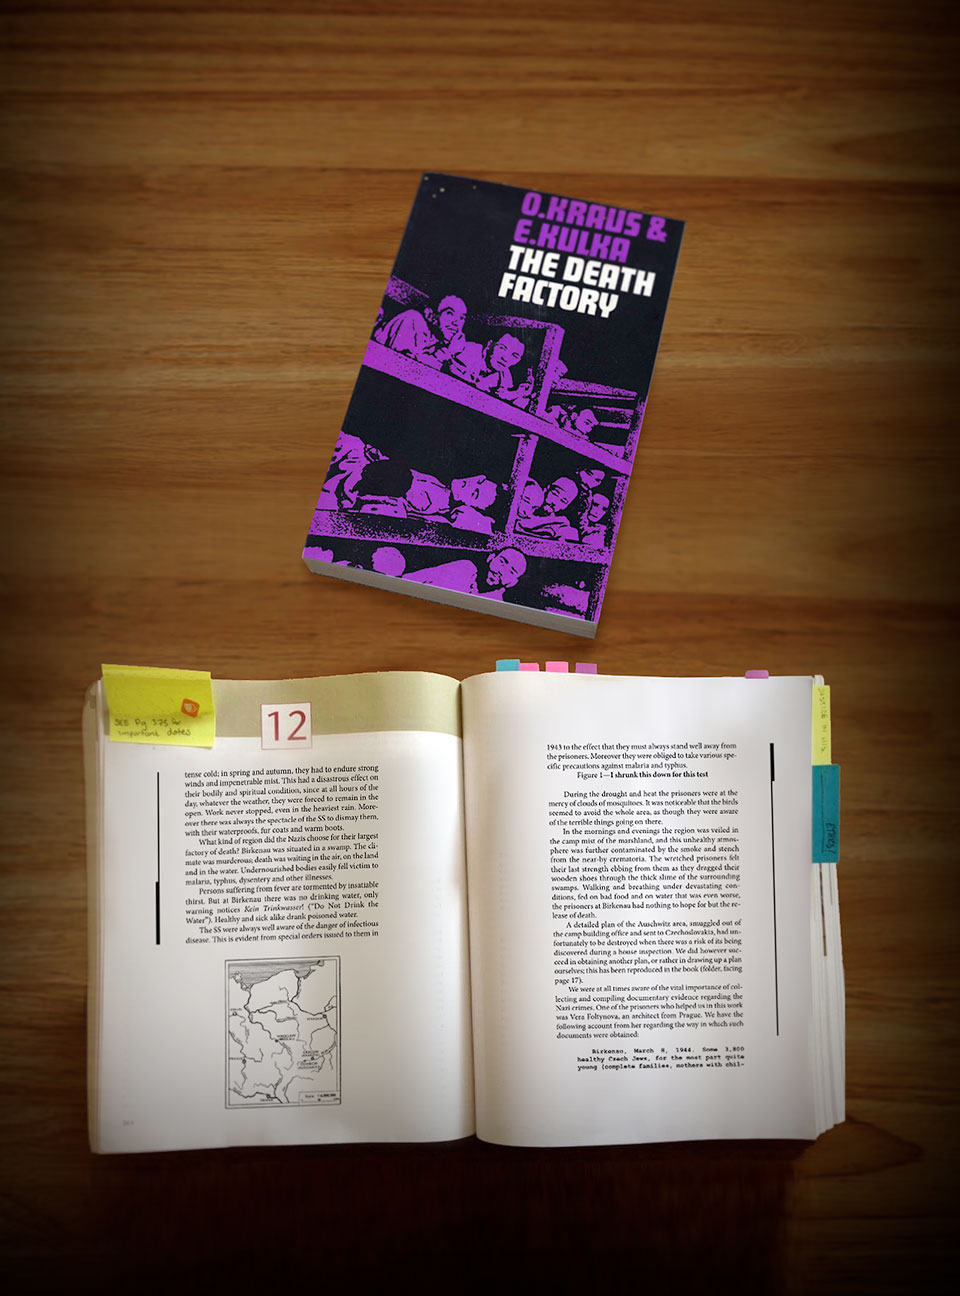 Reprint and modernized layout of Death Factory